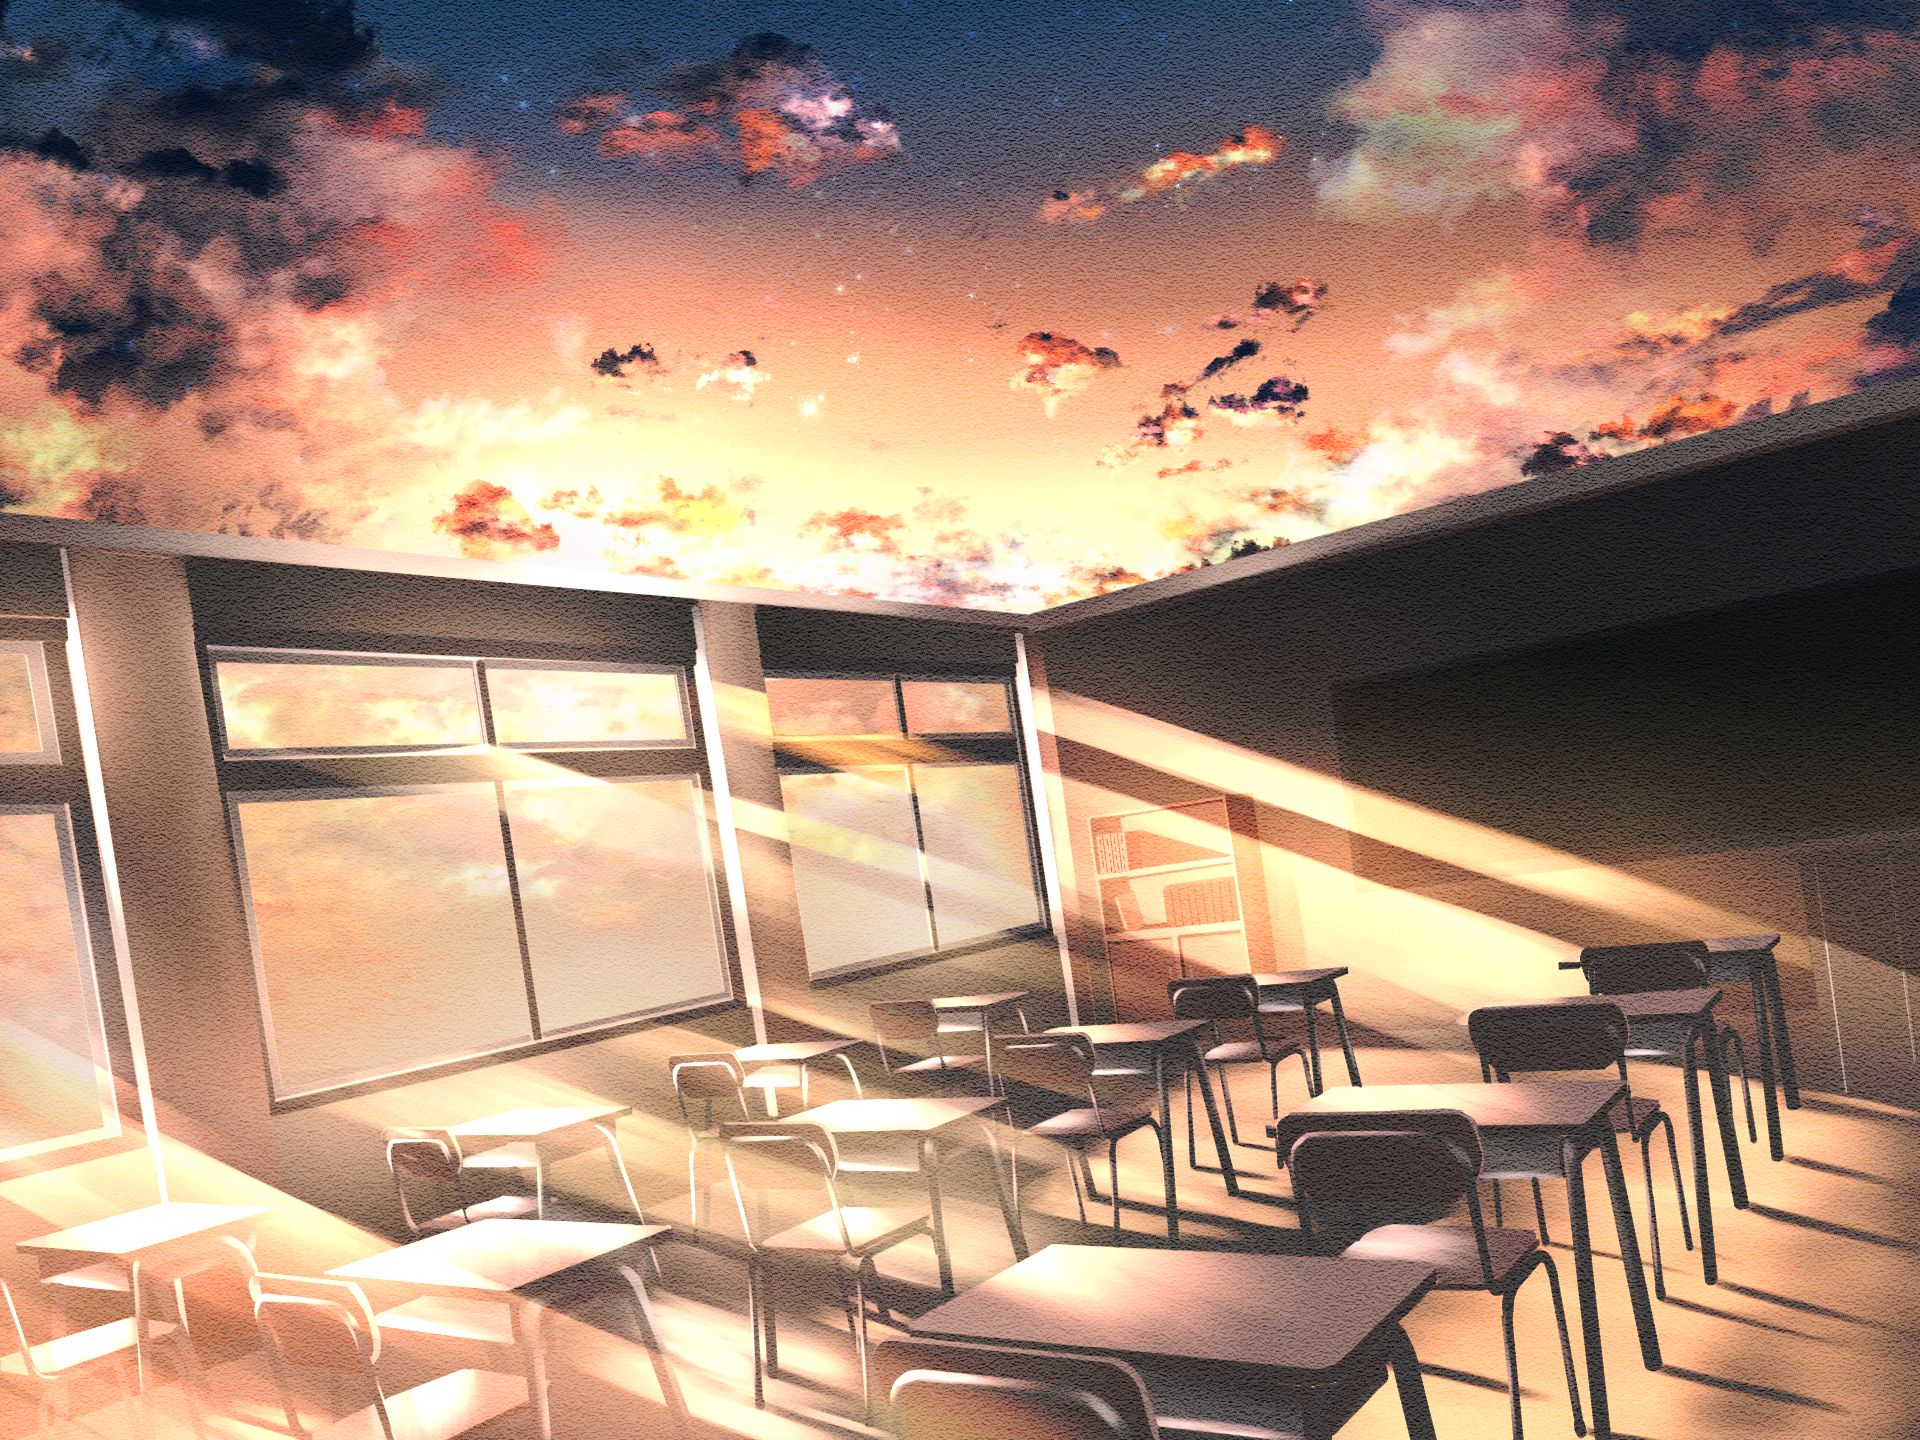 HD desktop wallpaper: Anime, Sunset, Room, Classroom download free picture  #968554